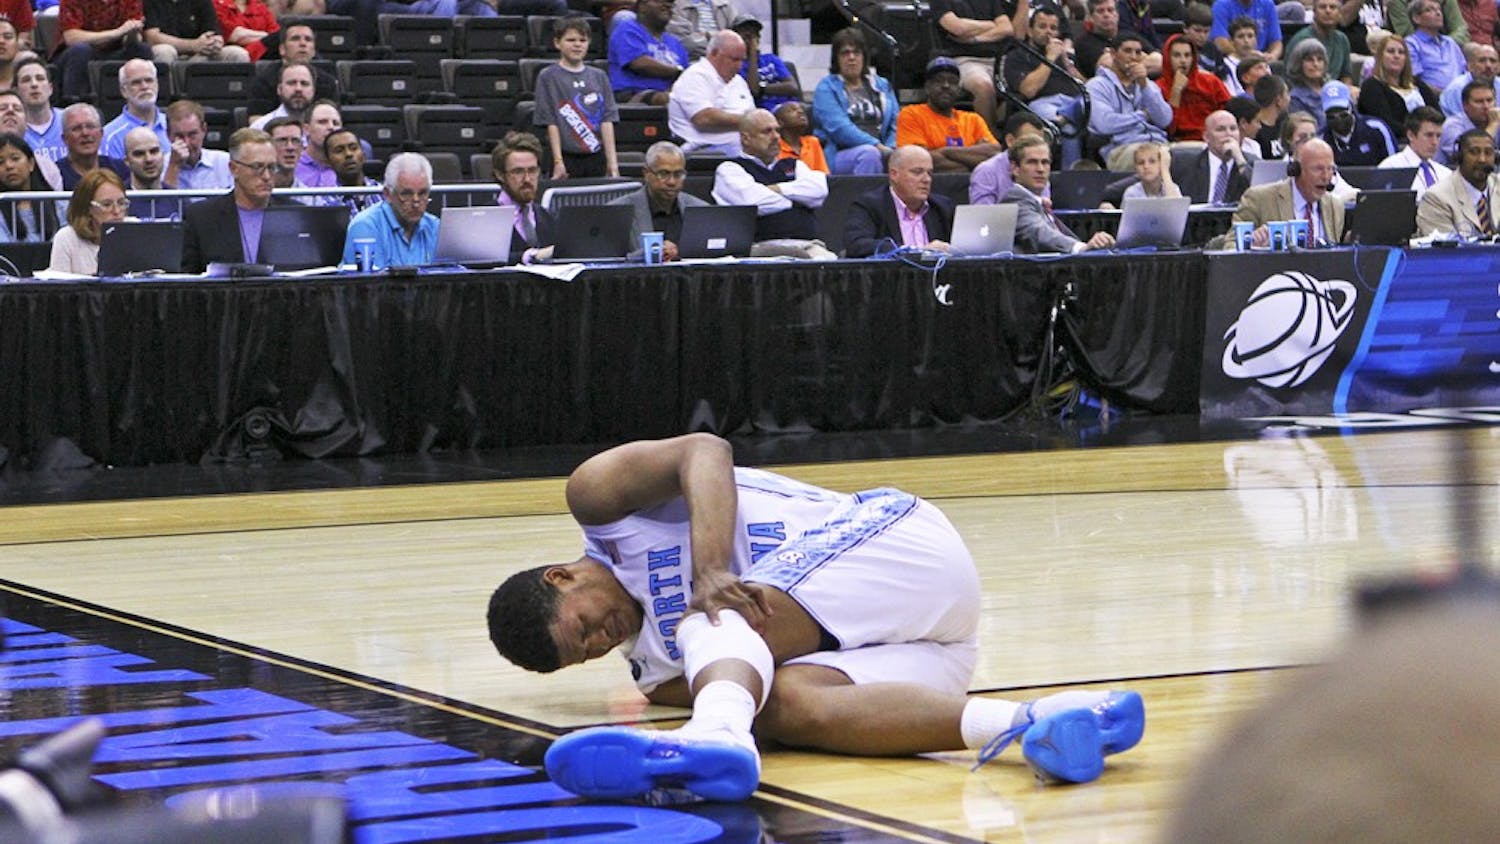 Sophomore forward Kennedy Meeks injures his knee toward the end of the second half during Saturday's win over Arkansas.